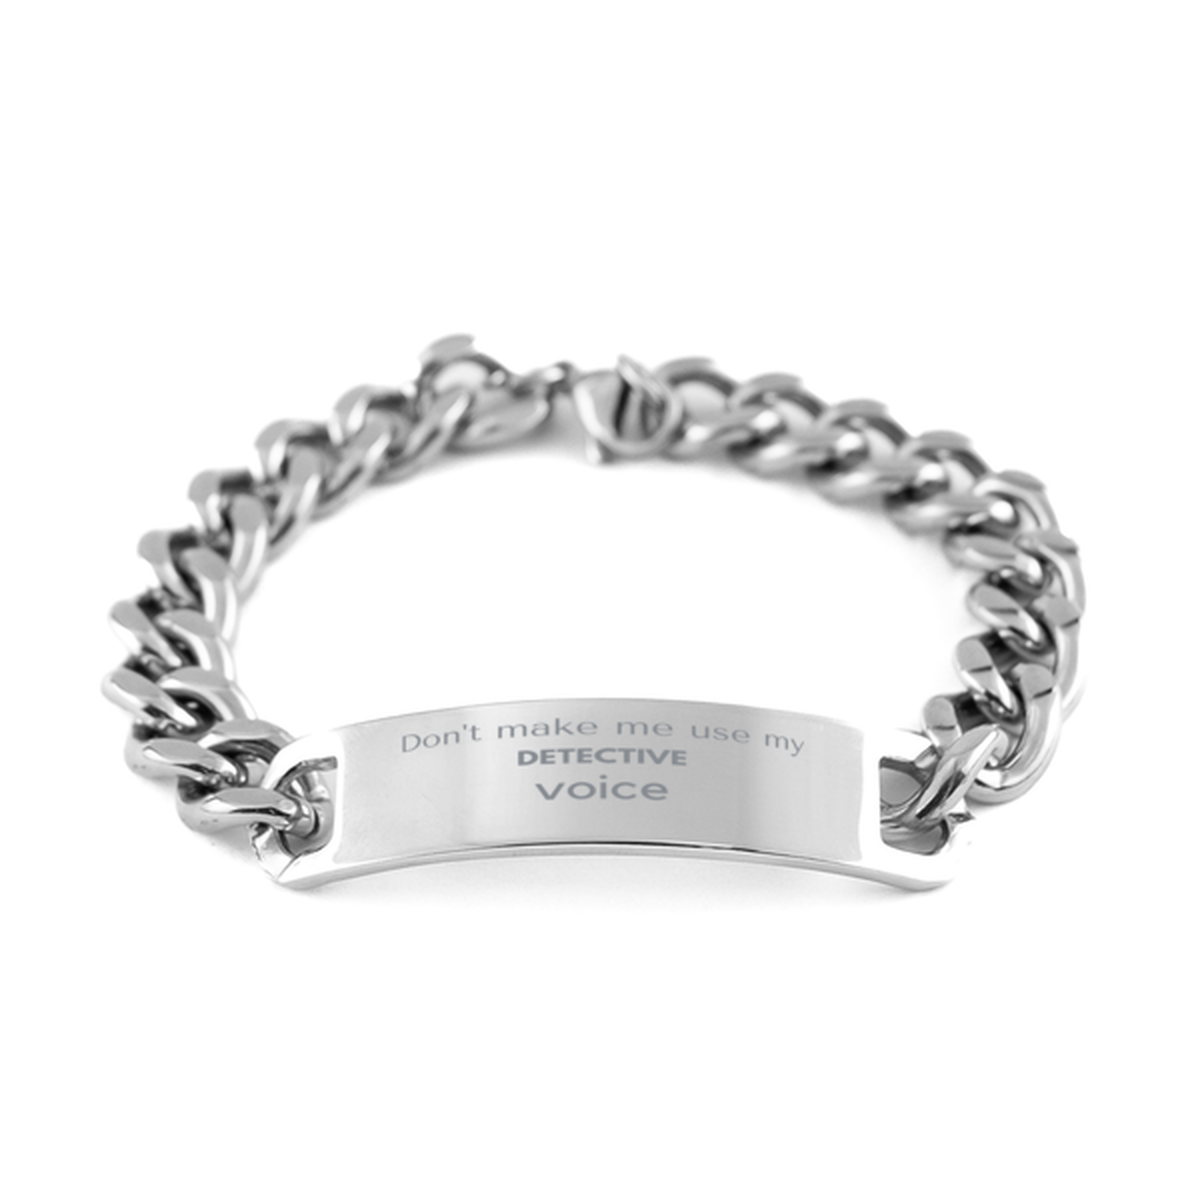 Don't make me use my Detective voice, Sarcasm Detective Gifts, Christmas Detective Cuban Chain Stainless Steel Bracelet Birthday Unique Gifts For Detective Coworkers, Men, Women, Colleague, Friends